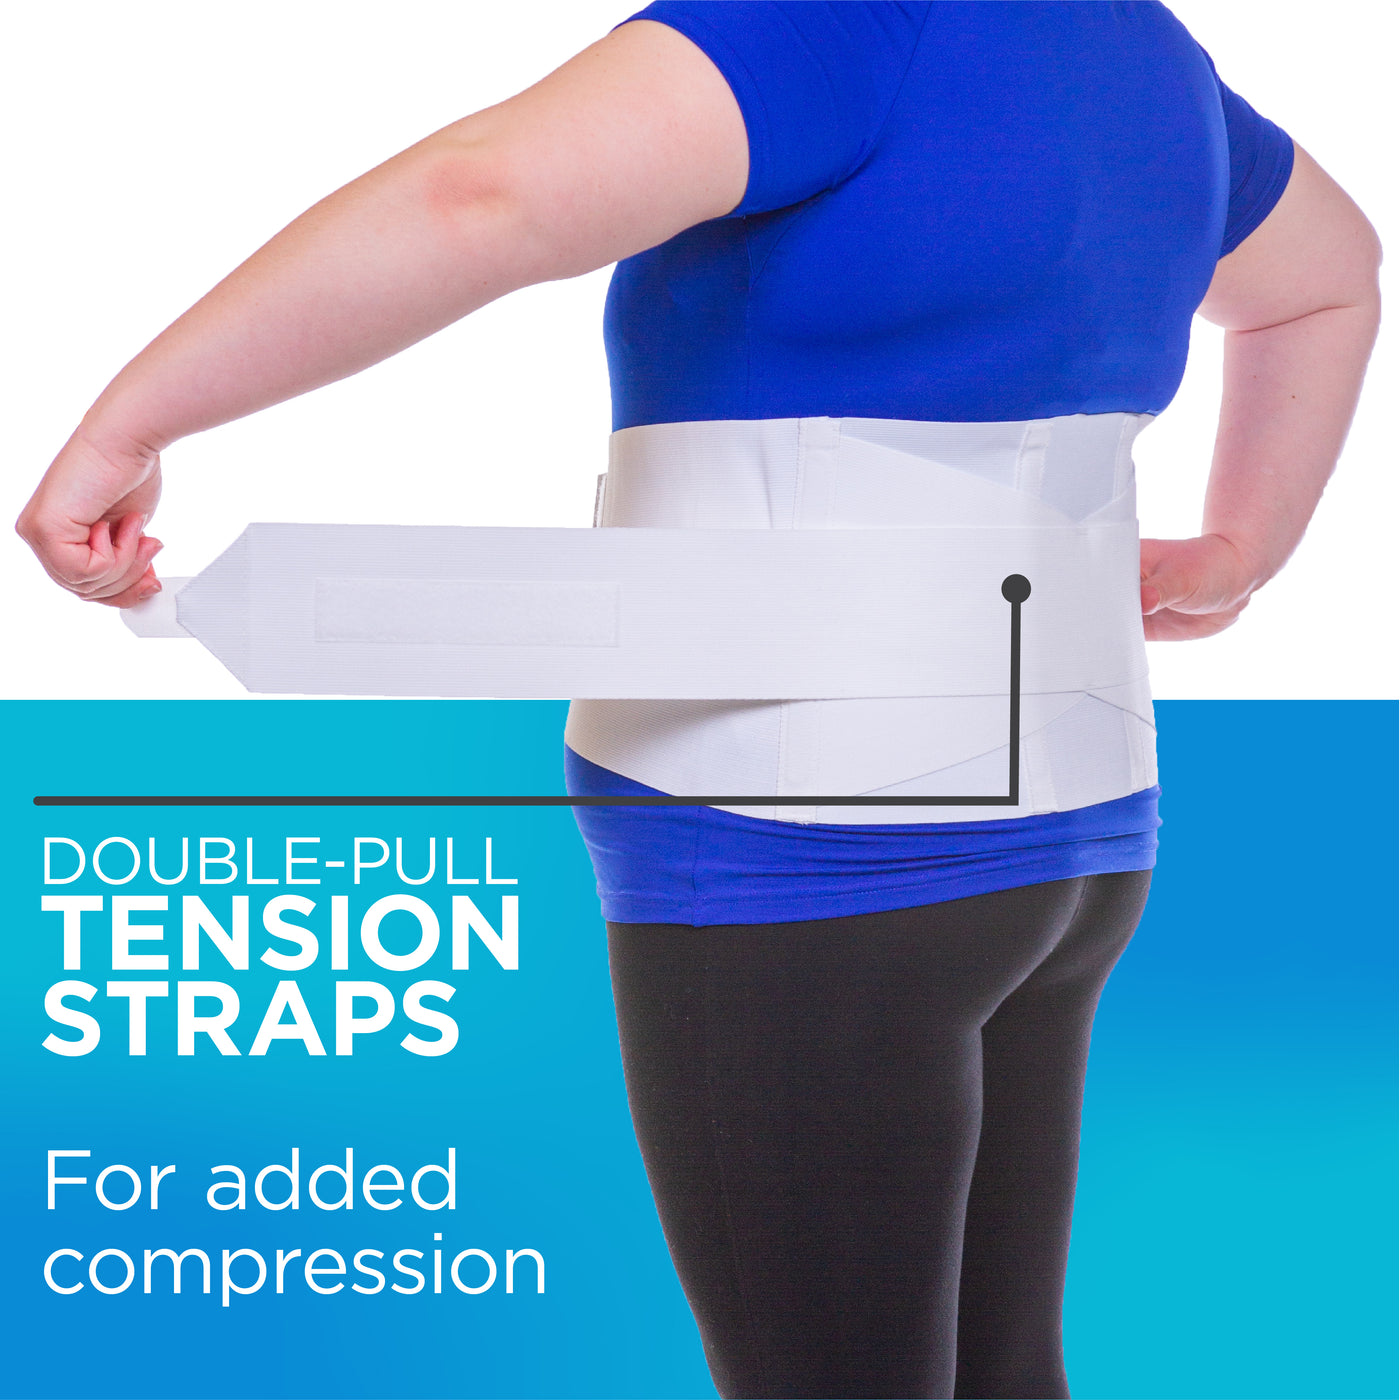 Double-pull elastic tension straps on the oversized lower back brace allow for more compression